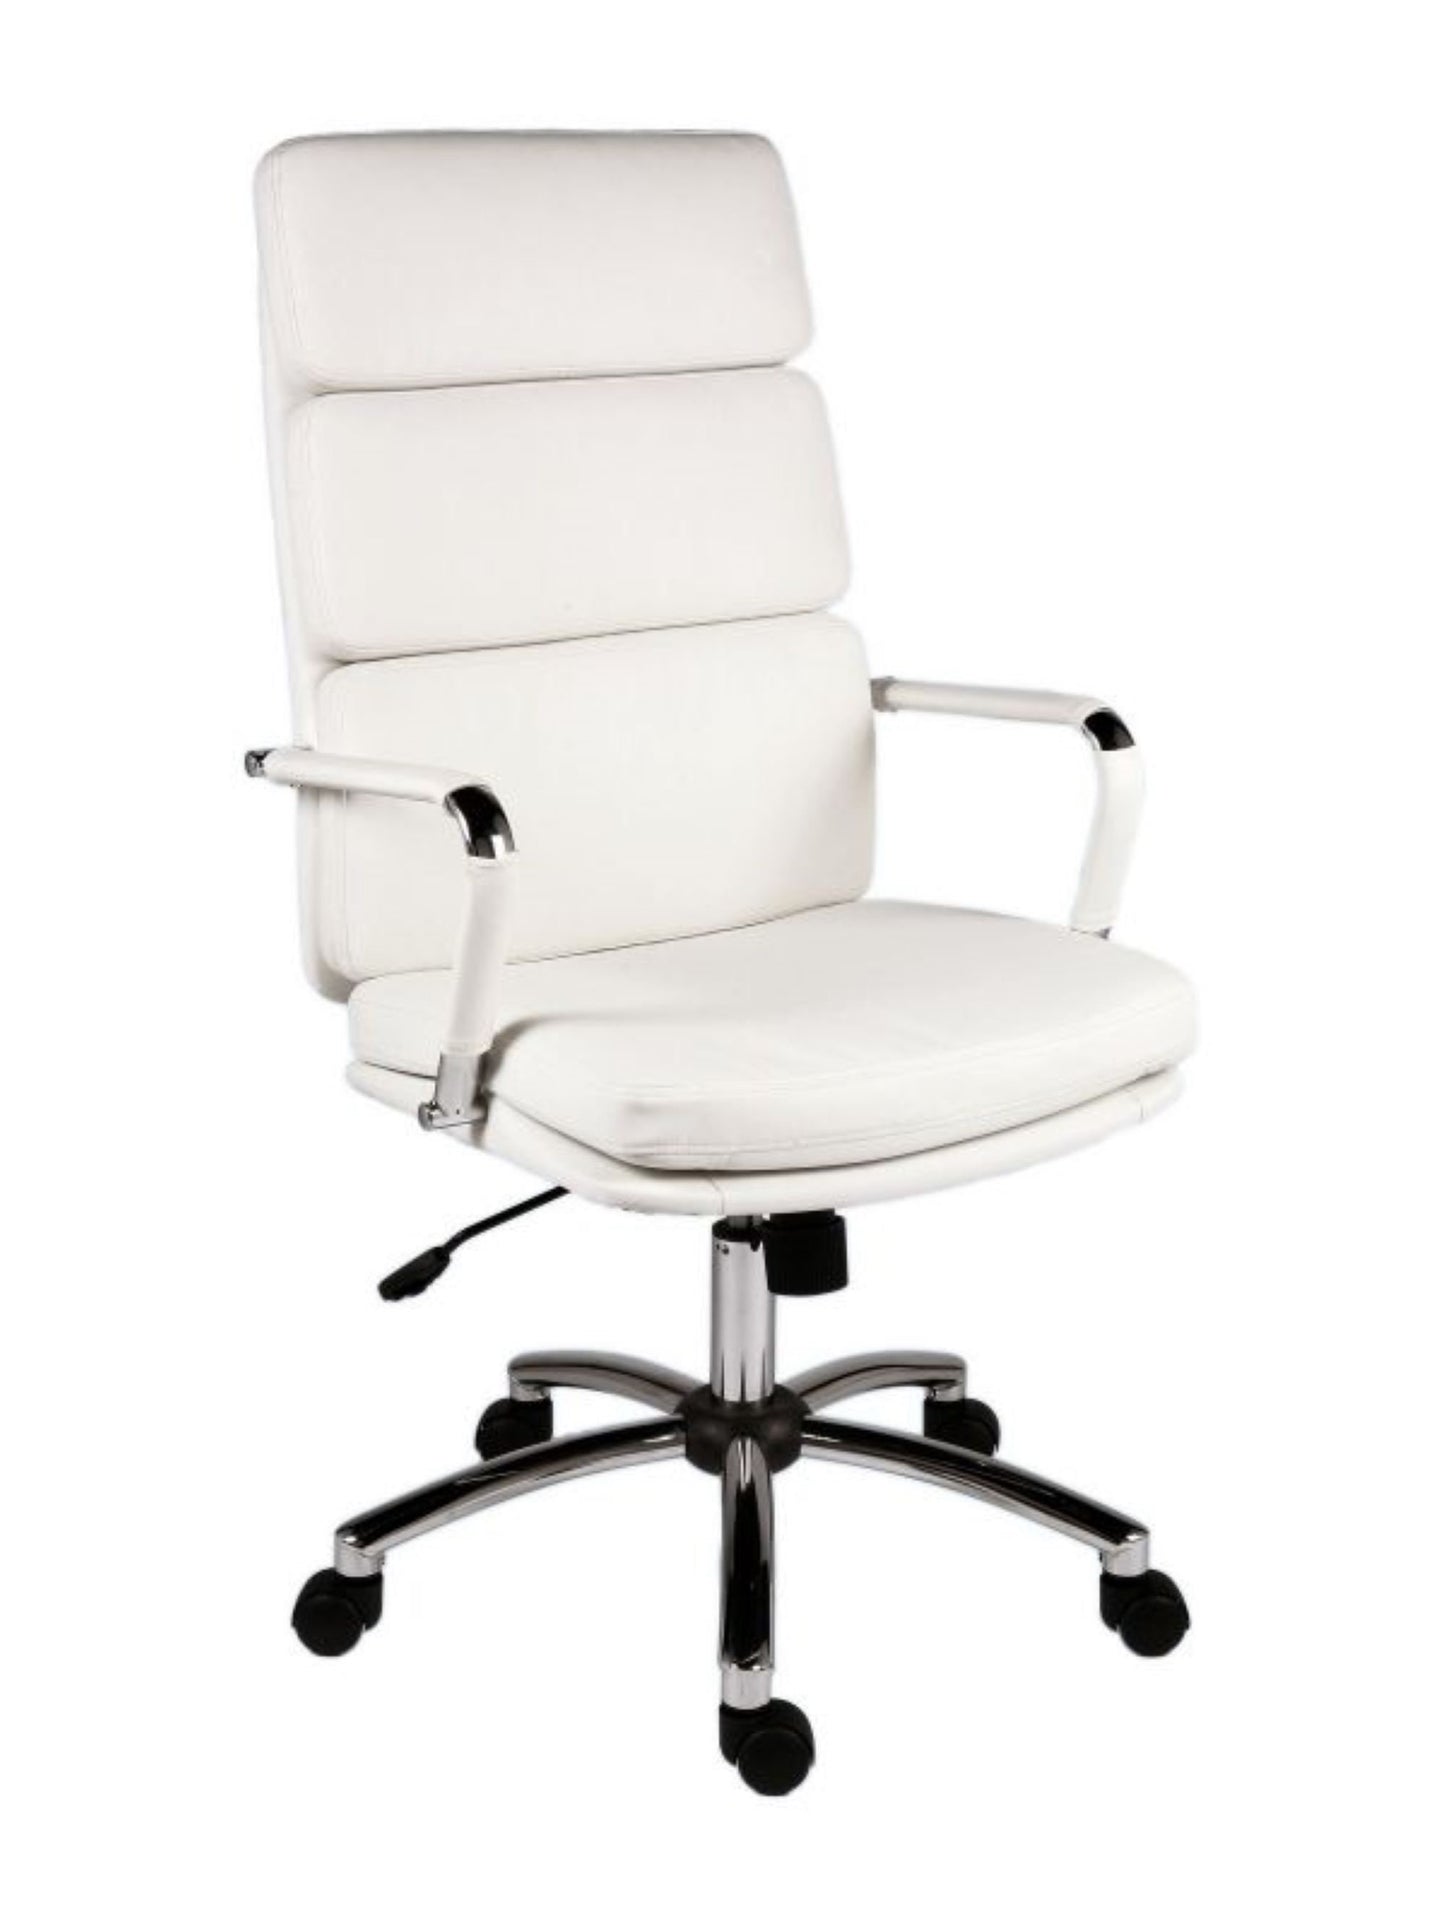 Retro style executive chair in Red, Black, White, Brown